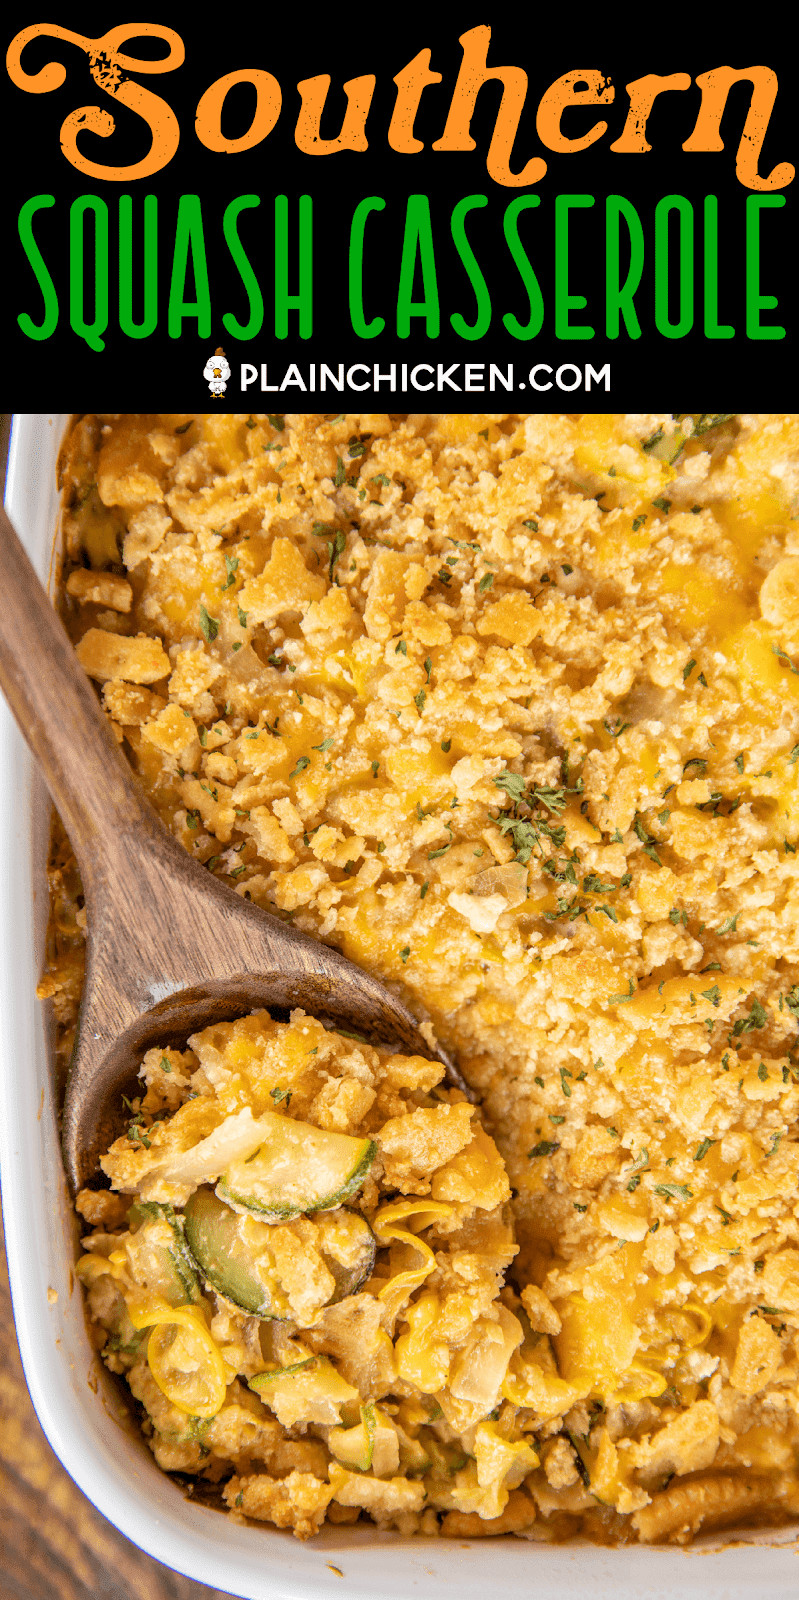 Squash Casserole With Ritz Crackers Fresh Southern Squash Casserole Of Squash Casserole With Ritz Crackers 